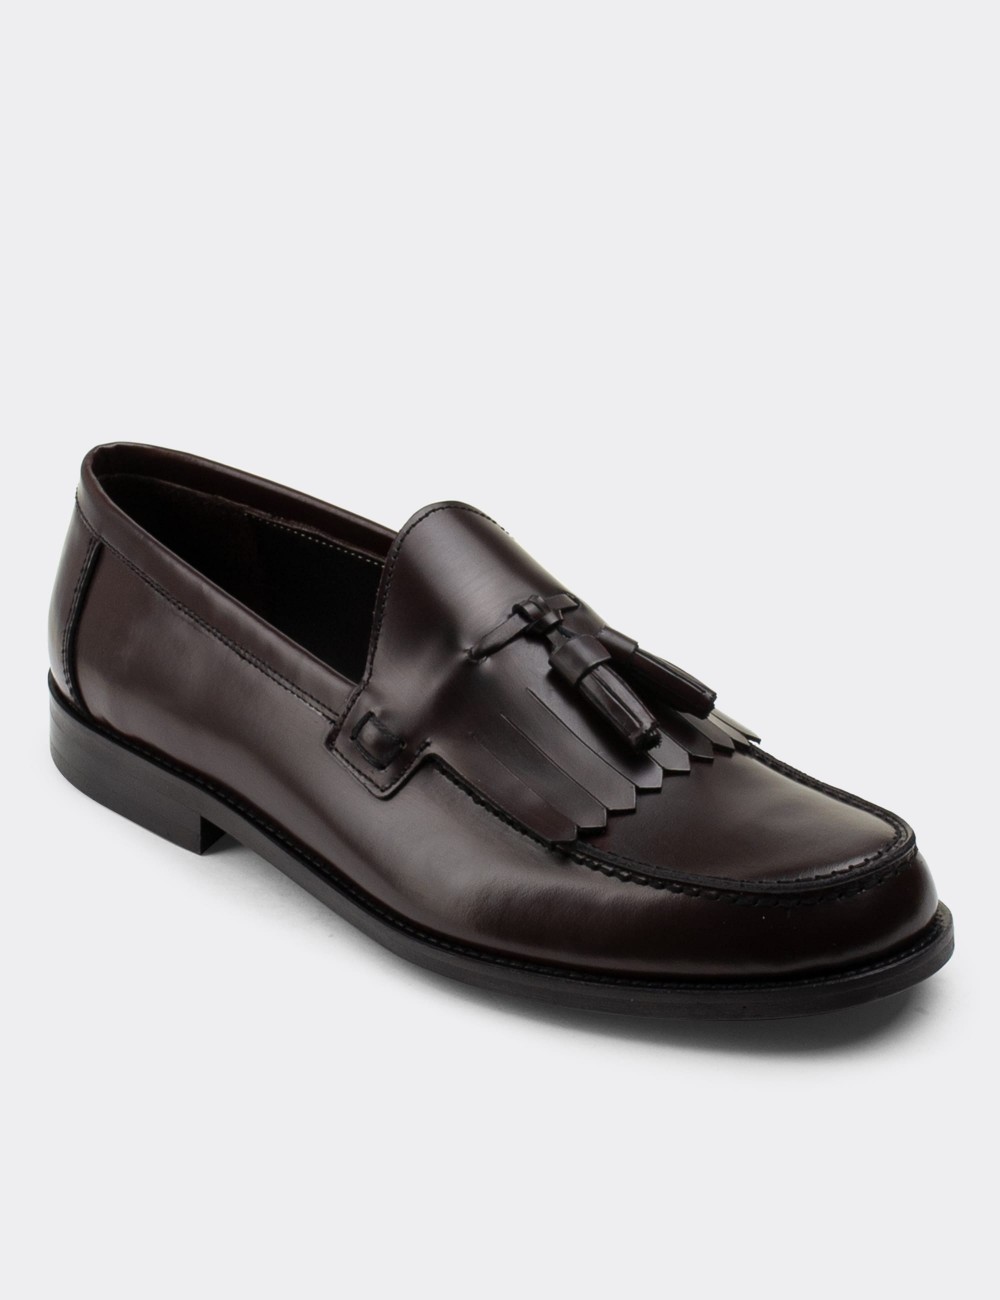 Burgundy  Leather Loafers - 01735MBRDM02